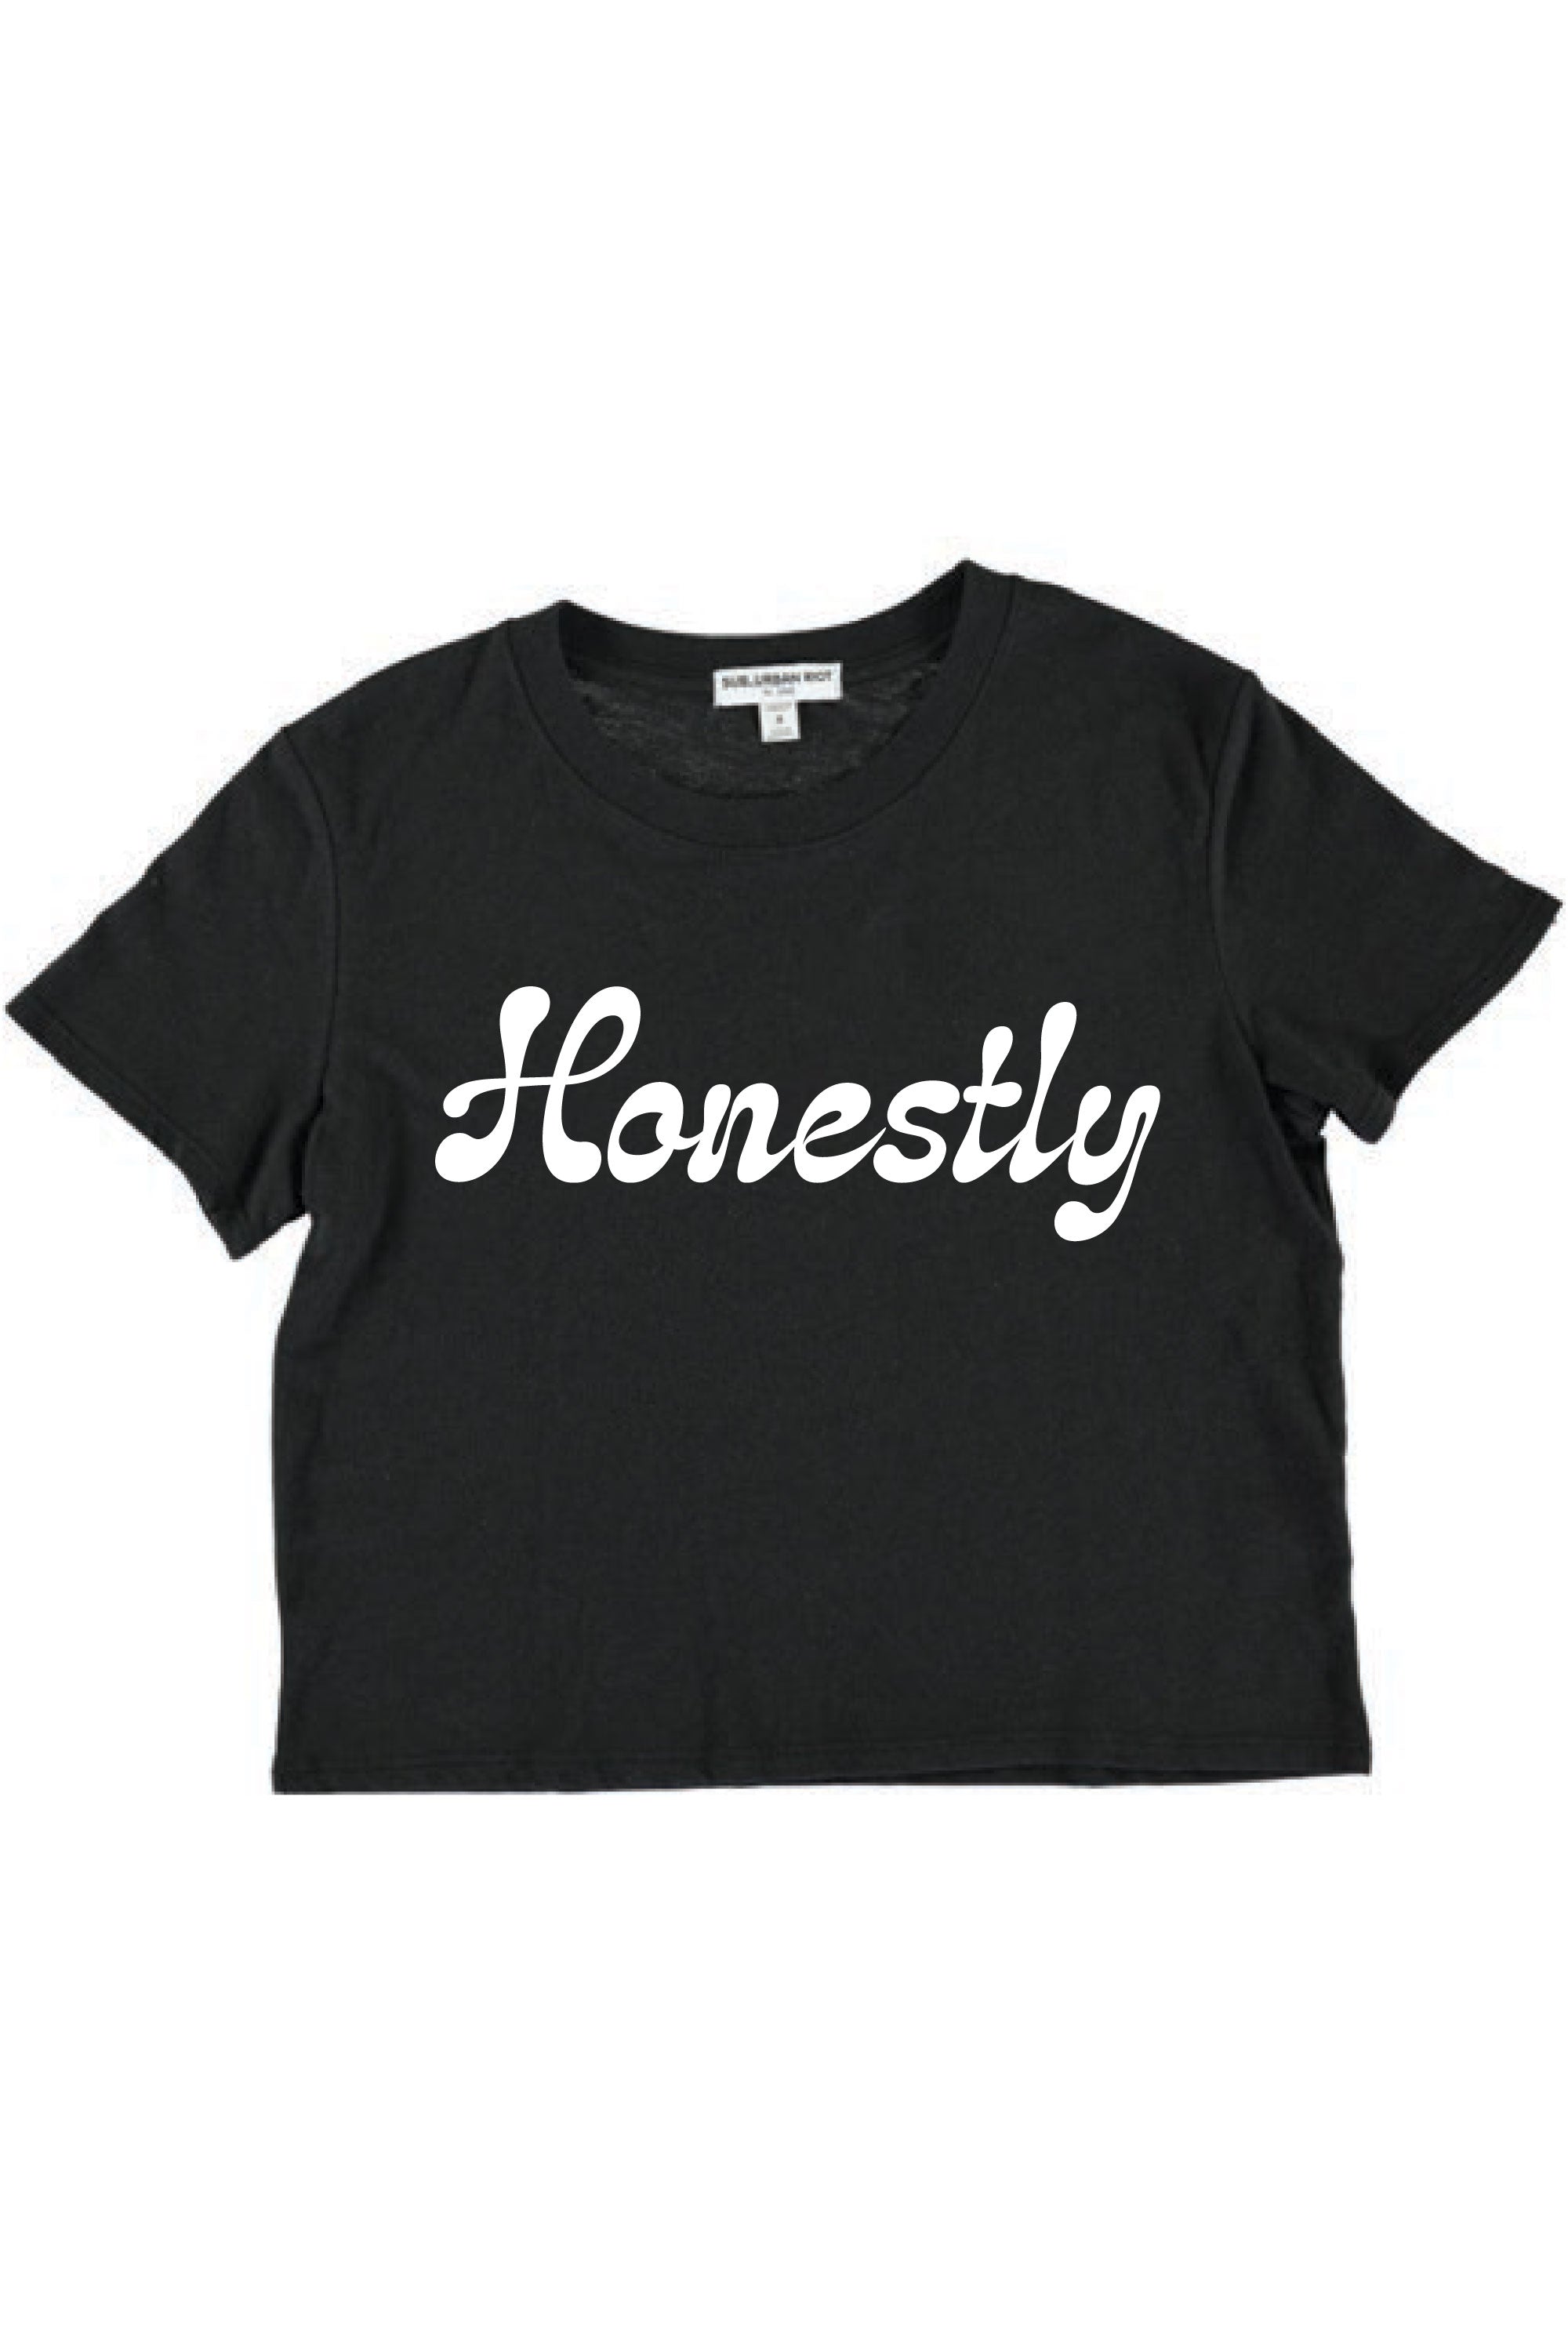 HONESTLY YOUTH SIZE CROP TEE